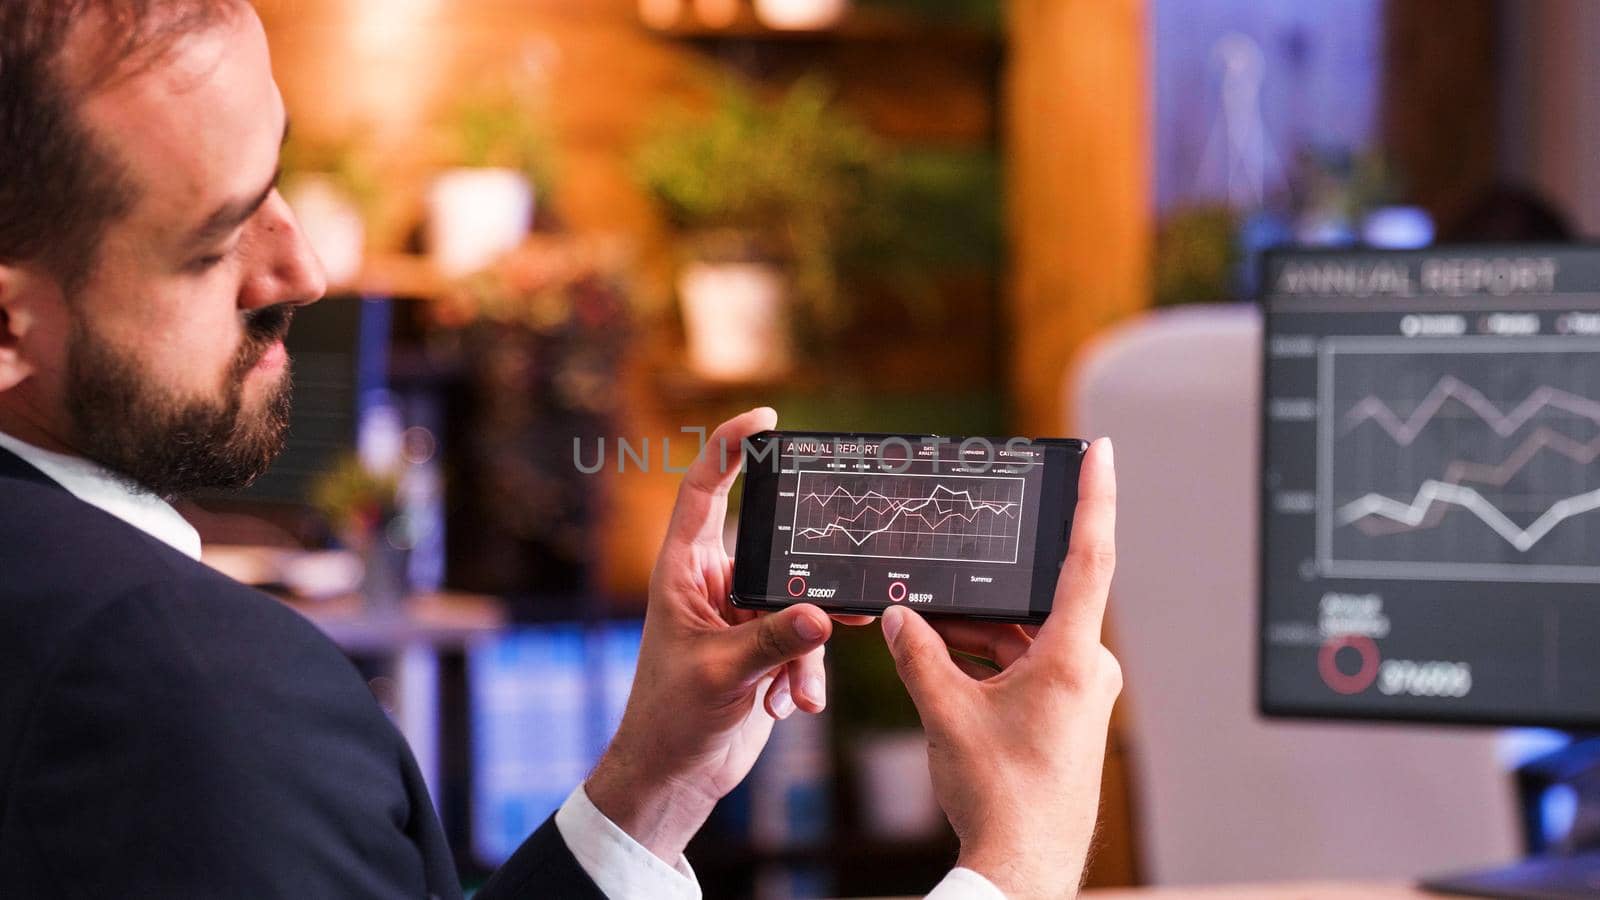 Close up as a businessman looks at some graphics on the smartphone screen. Office background